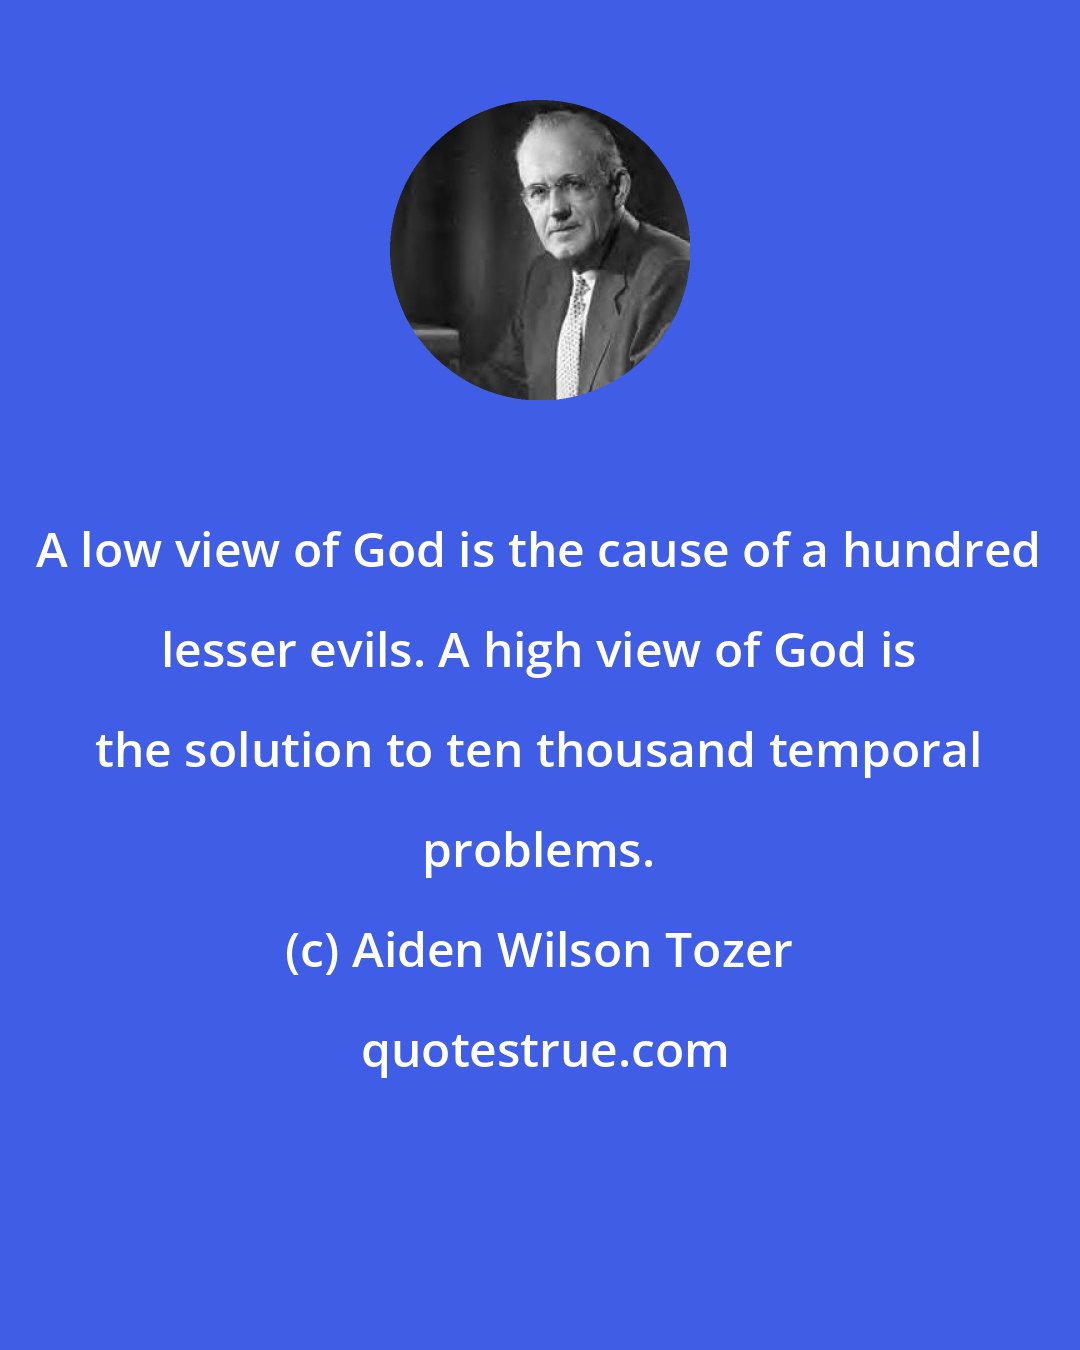 Aiden Wilson Tozer: A low view of God is the cause of a hundred lesser evils. A high view of God is the solution to ten thousand temporal problems.